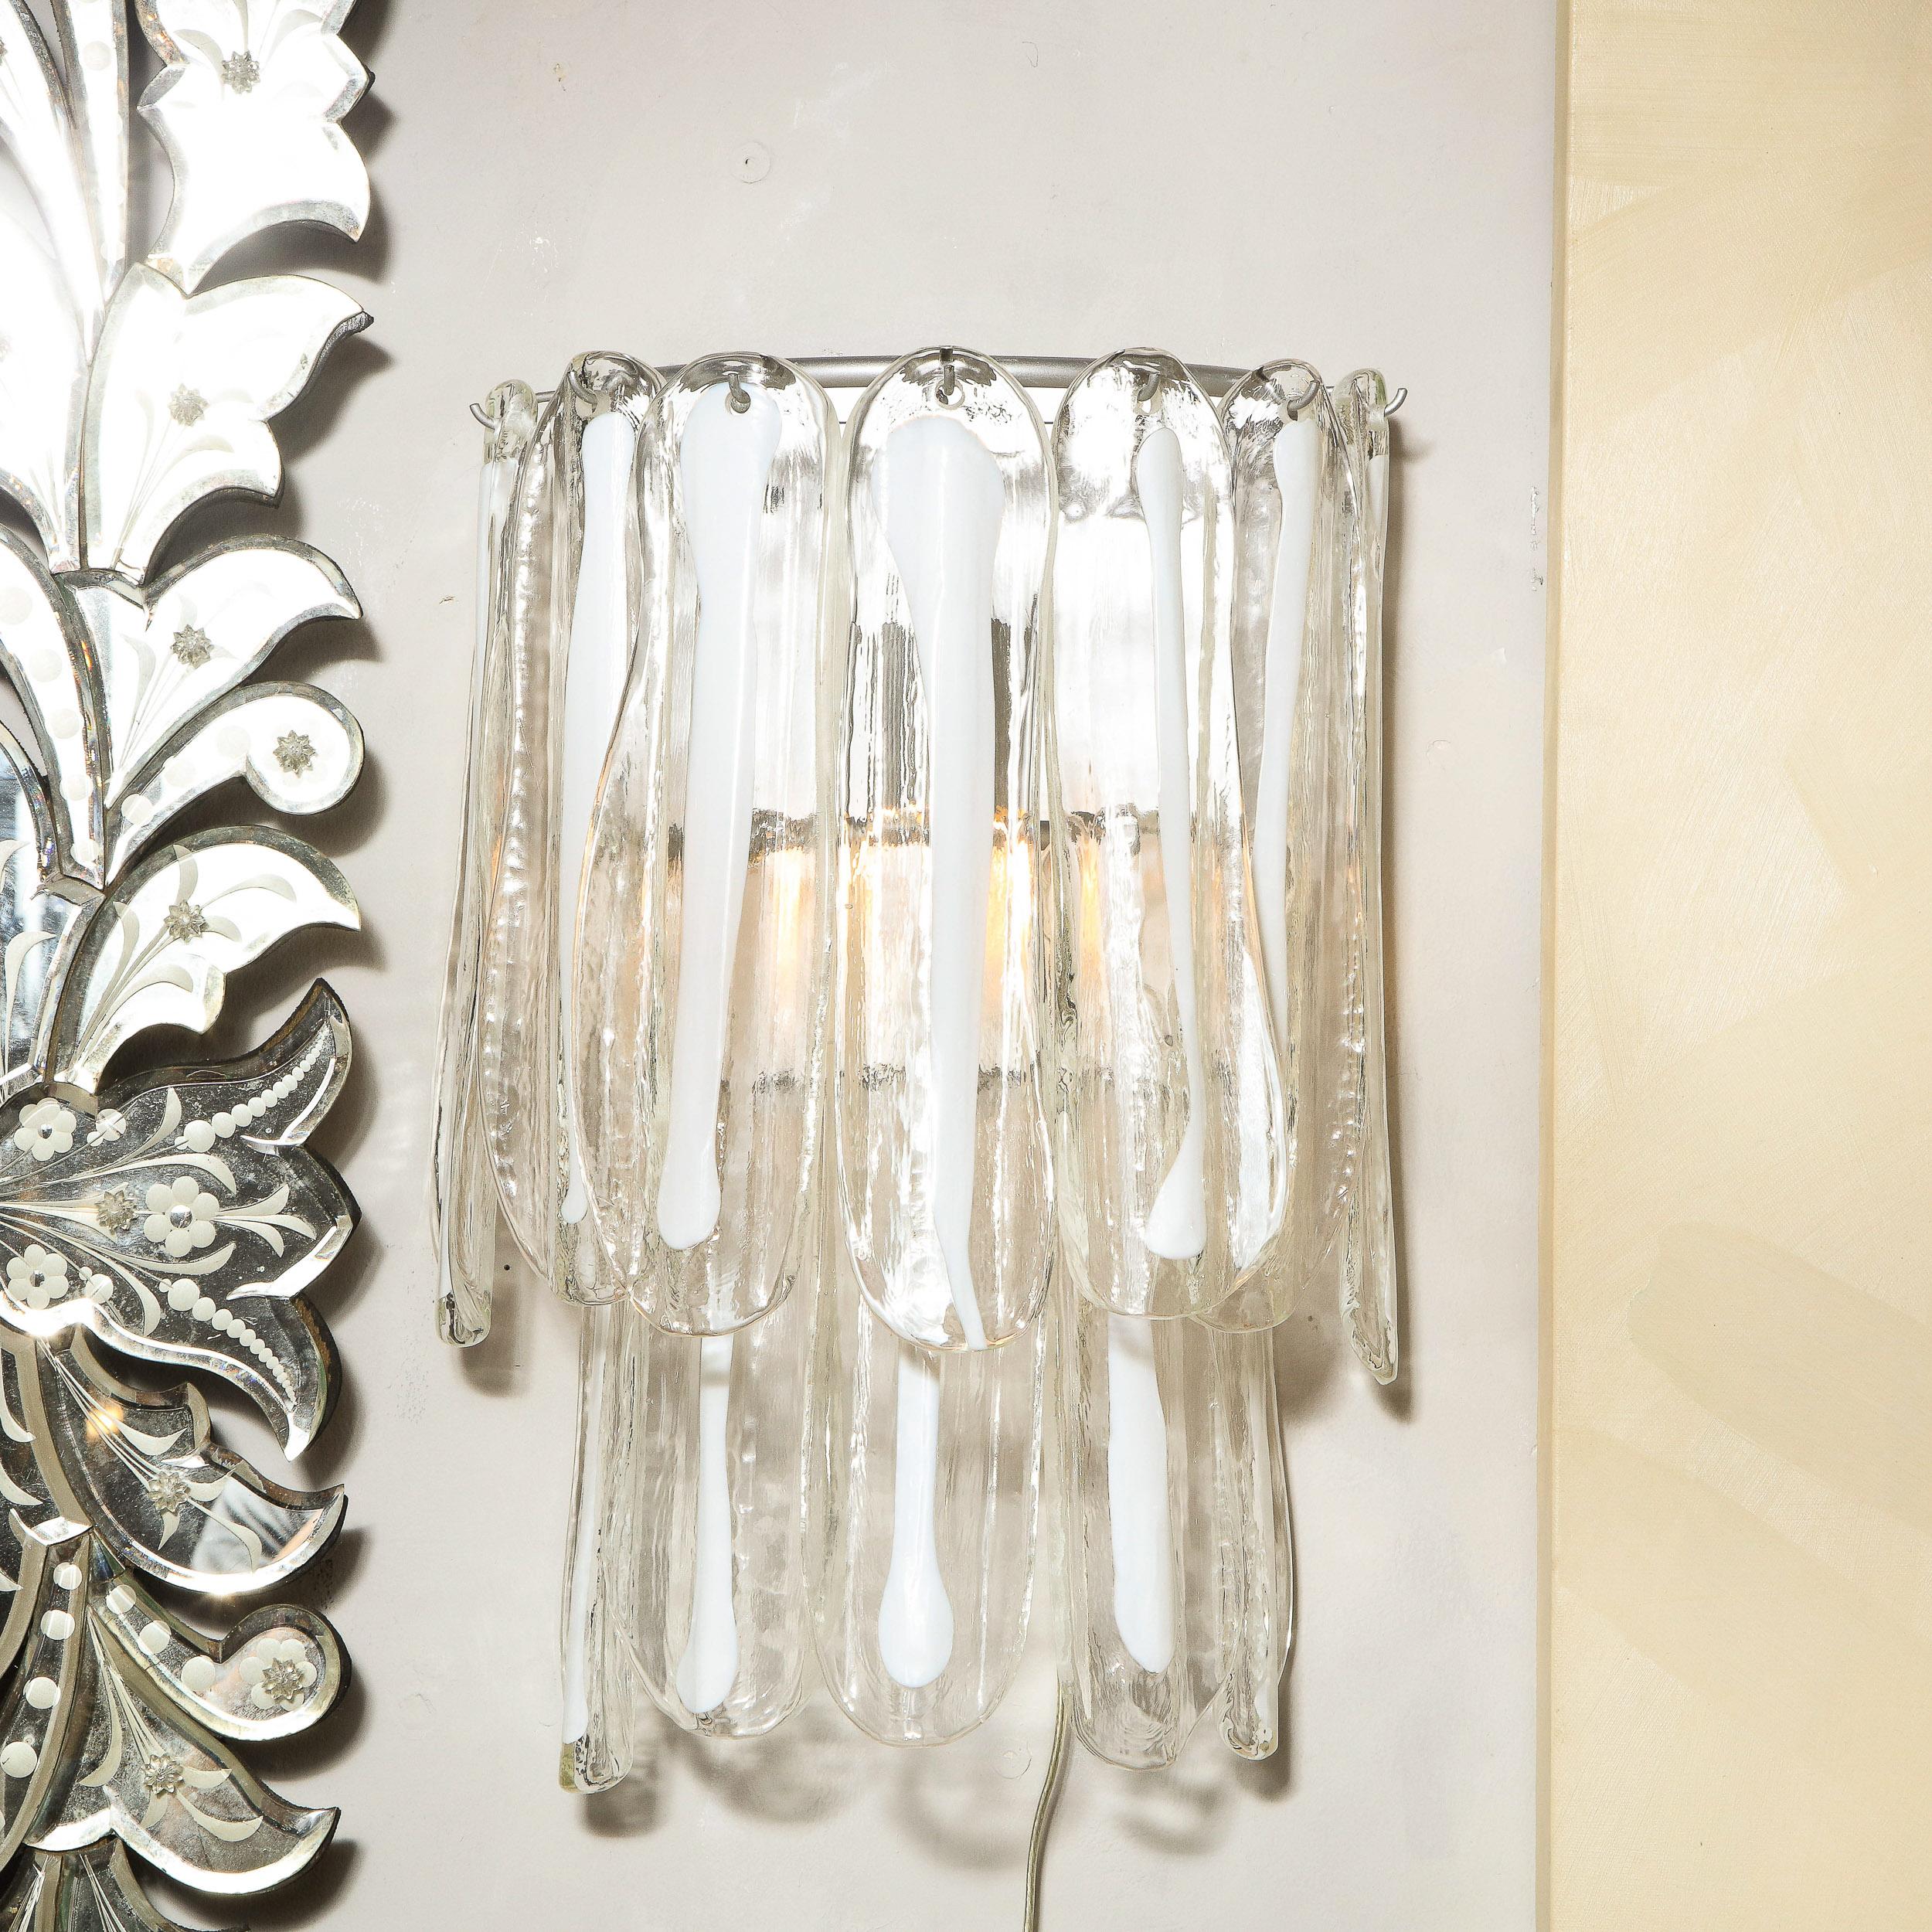 Pair of Mid-Century Modern Translucent & White Murano Glass Sconces by Mazzega For Sale 10